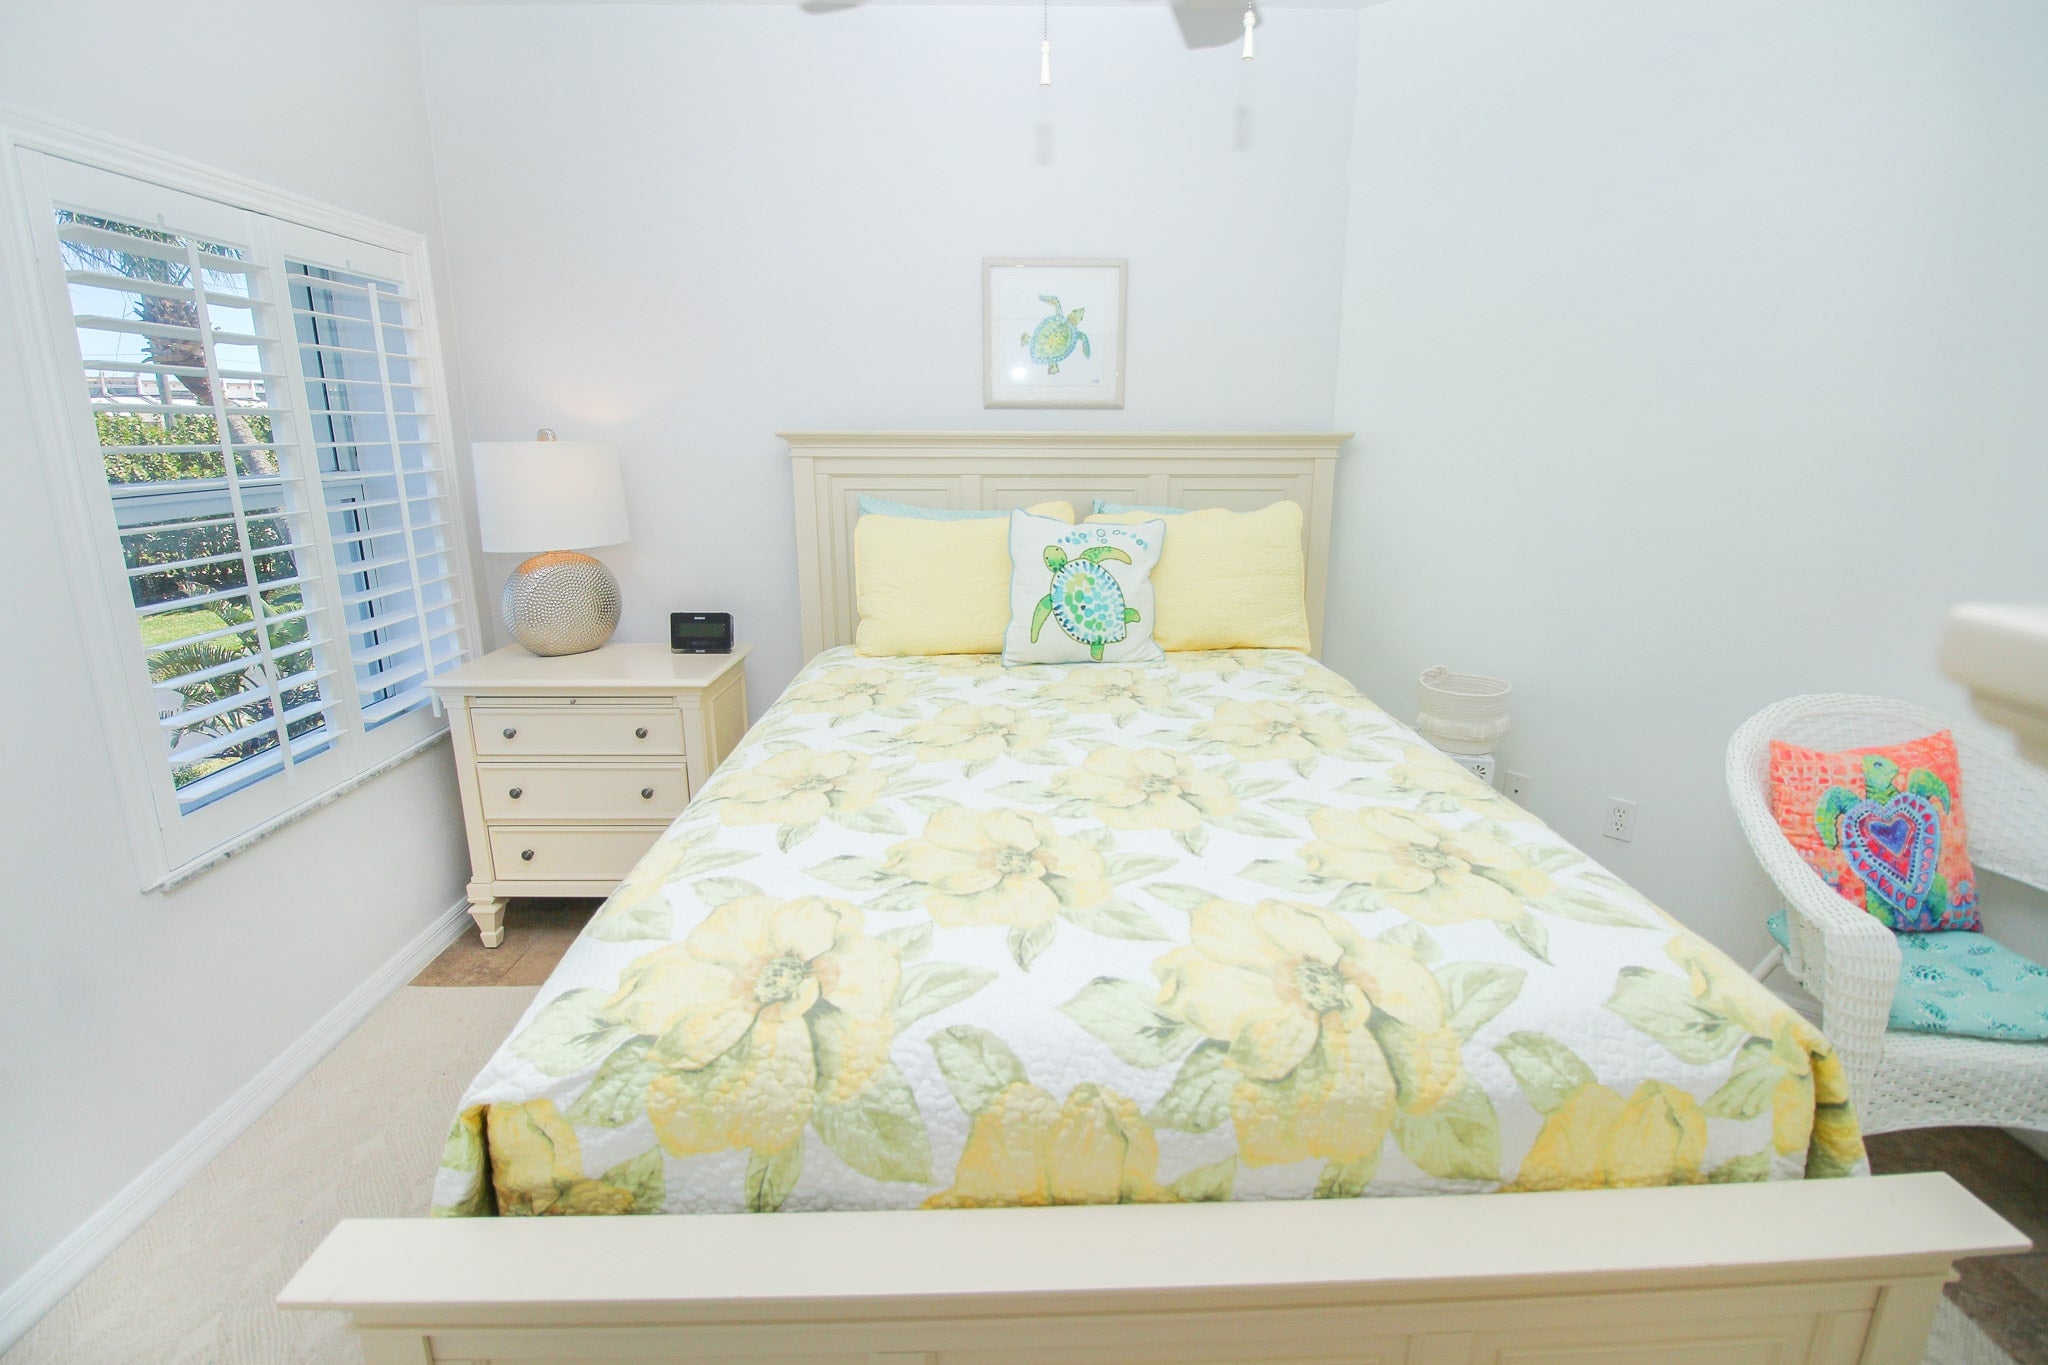 Bright colors in second bedroom